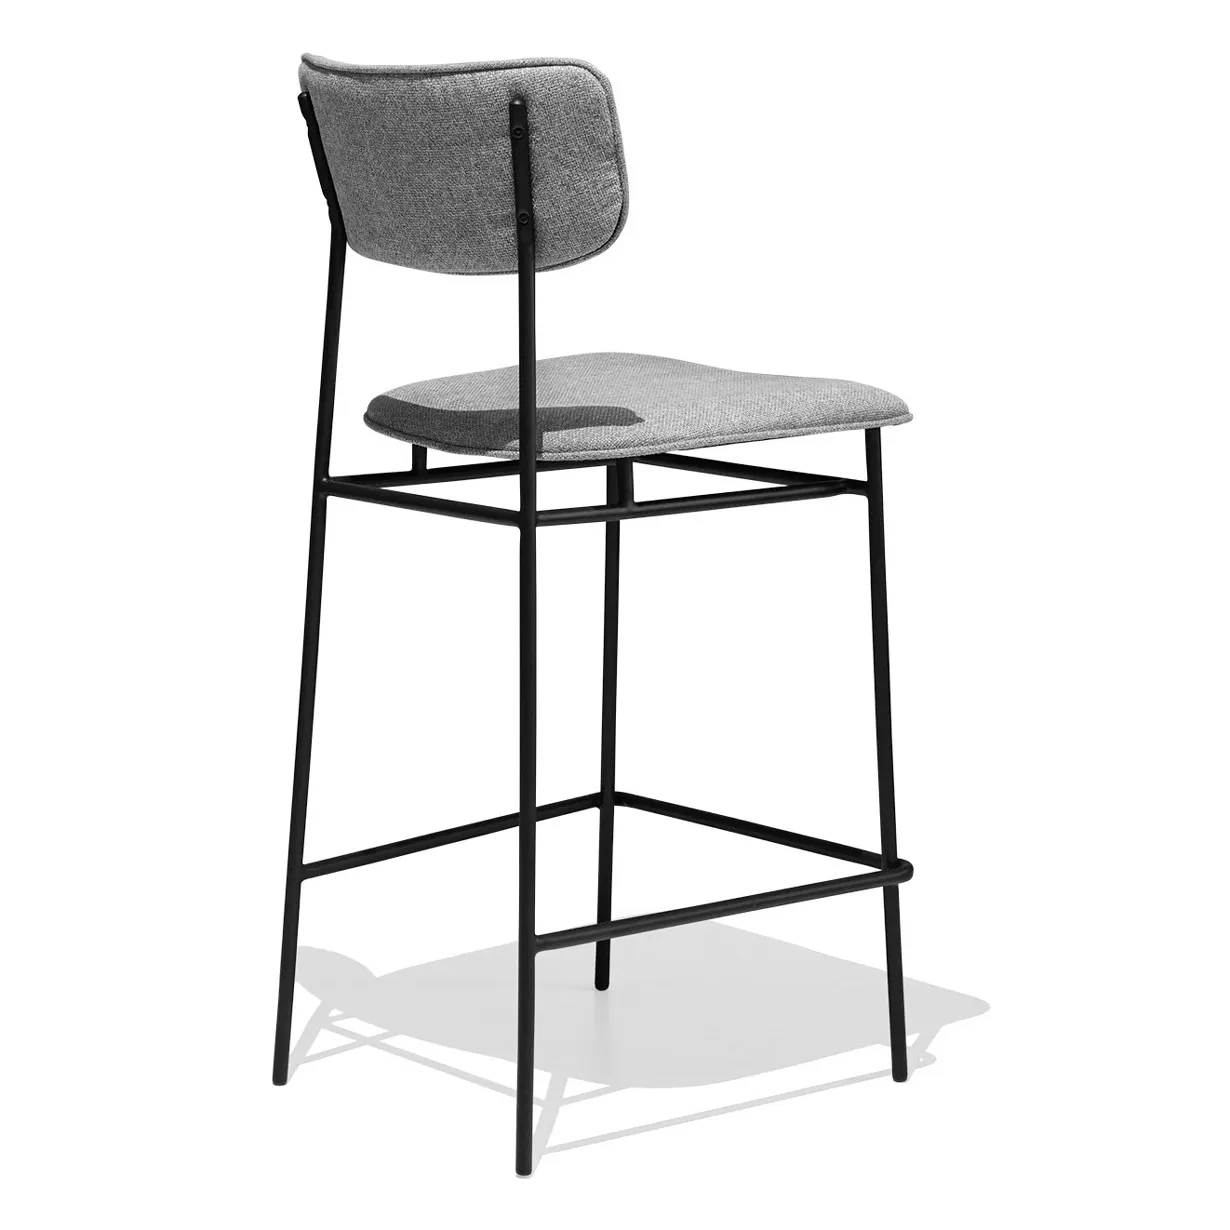 Fabric Bar Stool Commercial Comfortabale Soft Fabric Gray Seat Kitchen Bar Stools With Back